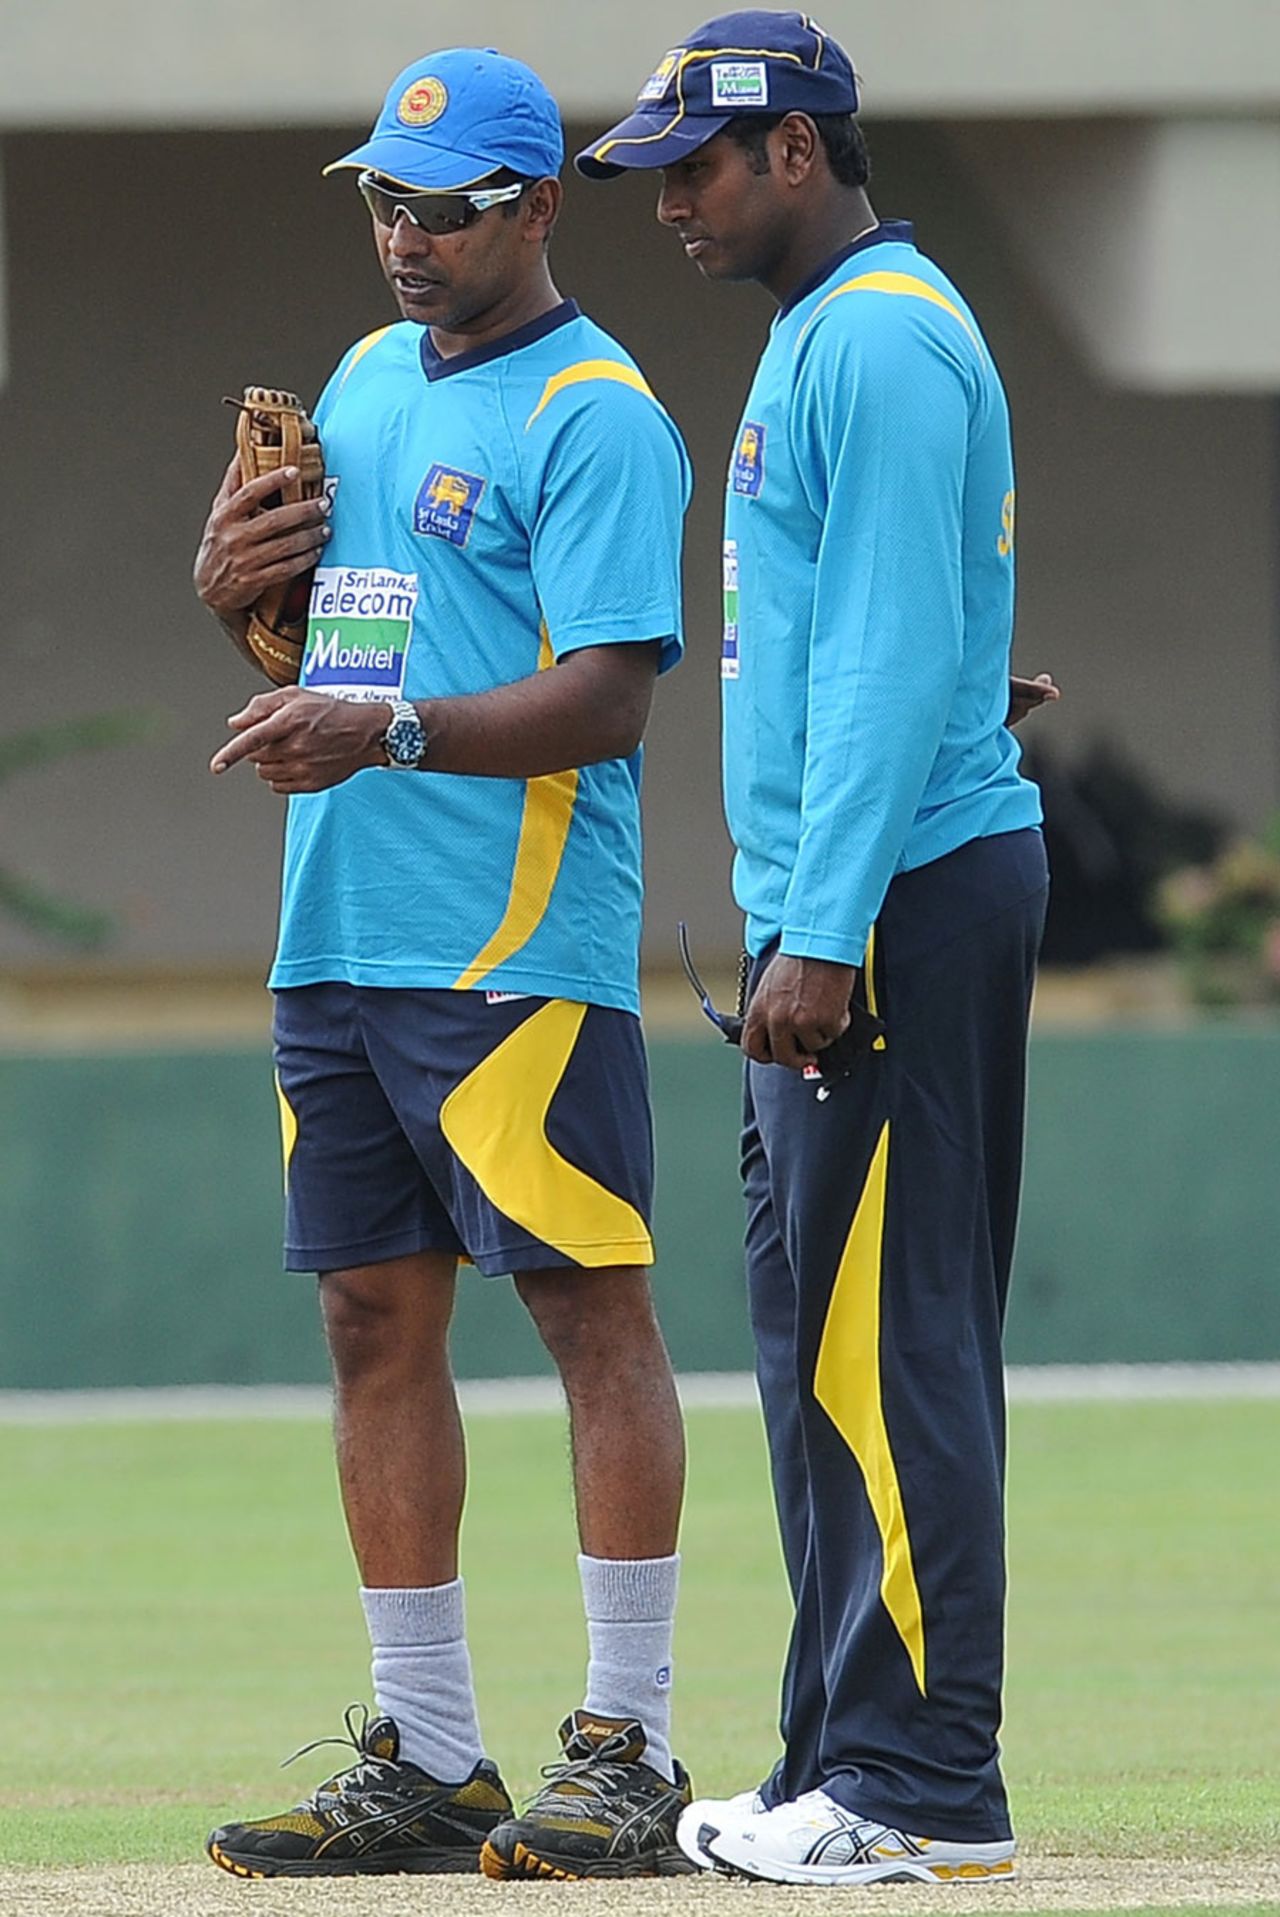 Chaminda Vaas and Sri Lanka captain Angelo Mathews examine the pitch at a practice session ahead of the Test series against Bangladesh in Galle, Bangladesh tour to Sri Lanka, Galle, March 6, 2013